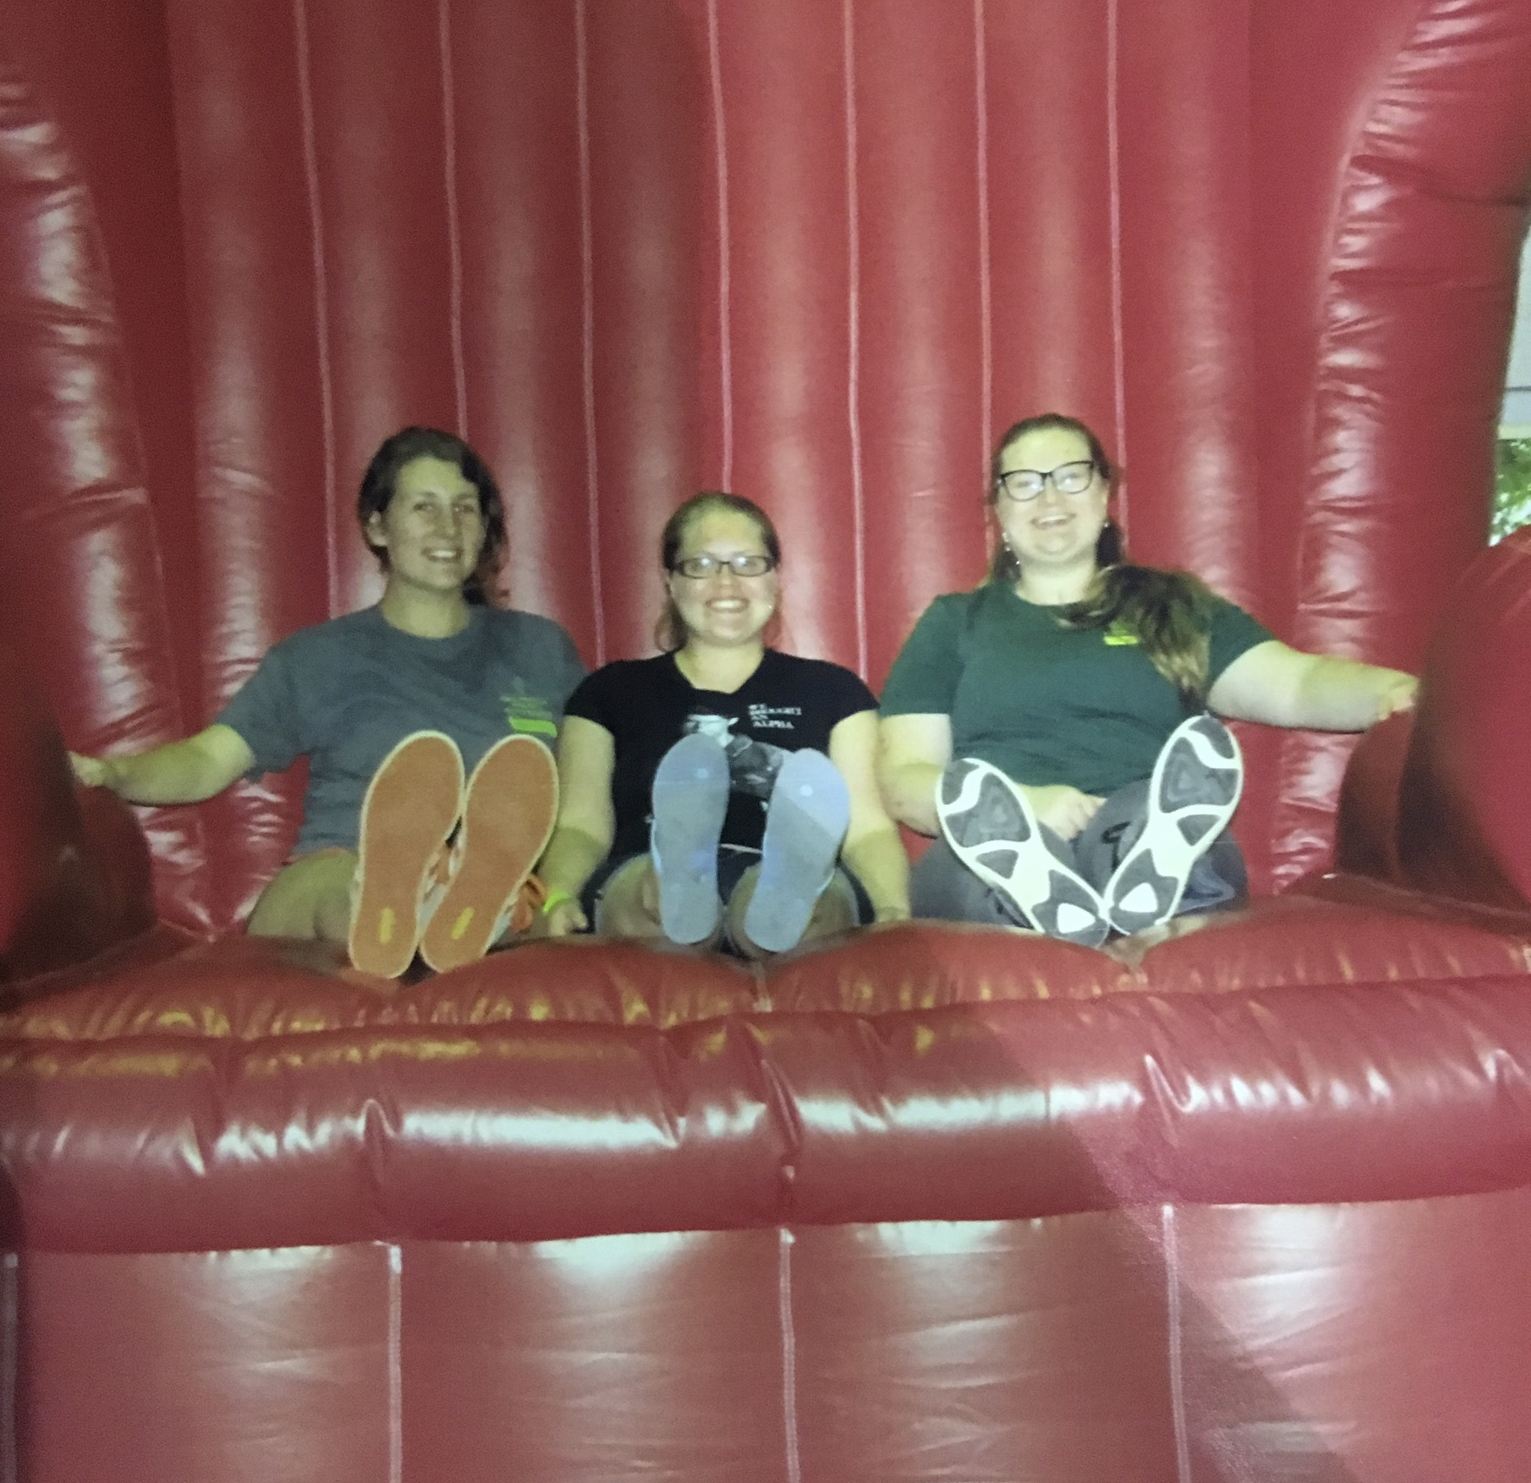 Jillian and friends on a large red chair